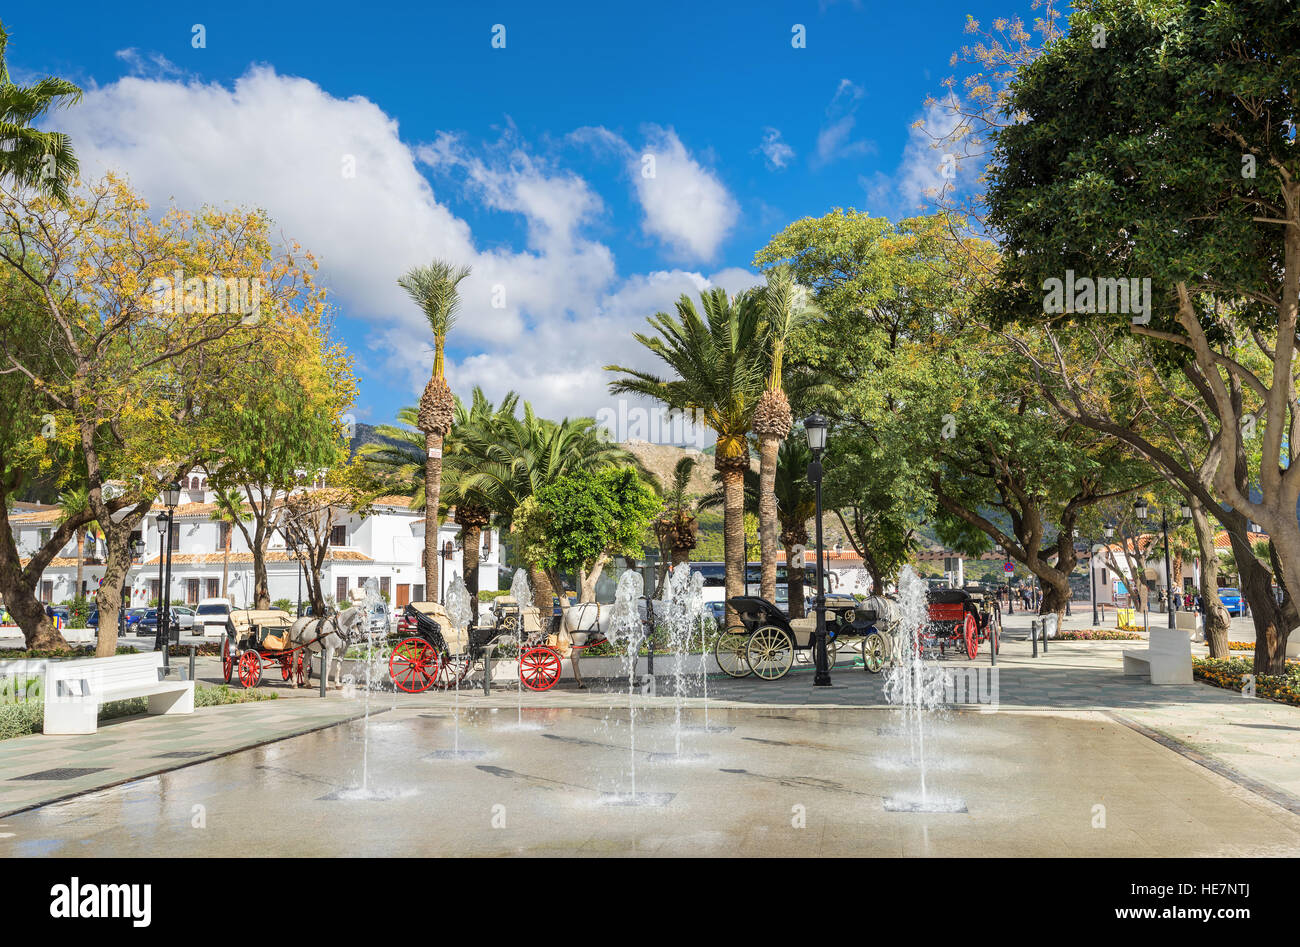 Fountain and horse carriages in town square of Mijas. Malaga province, Andalusia, Spain Stock Photo